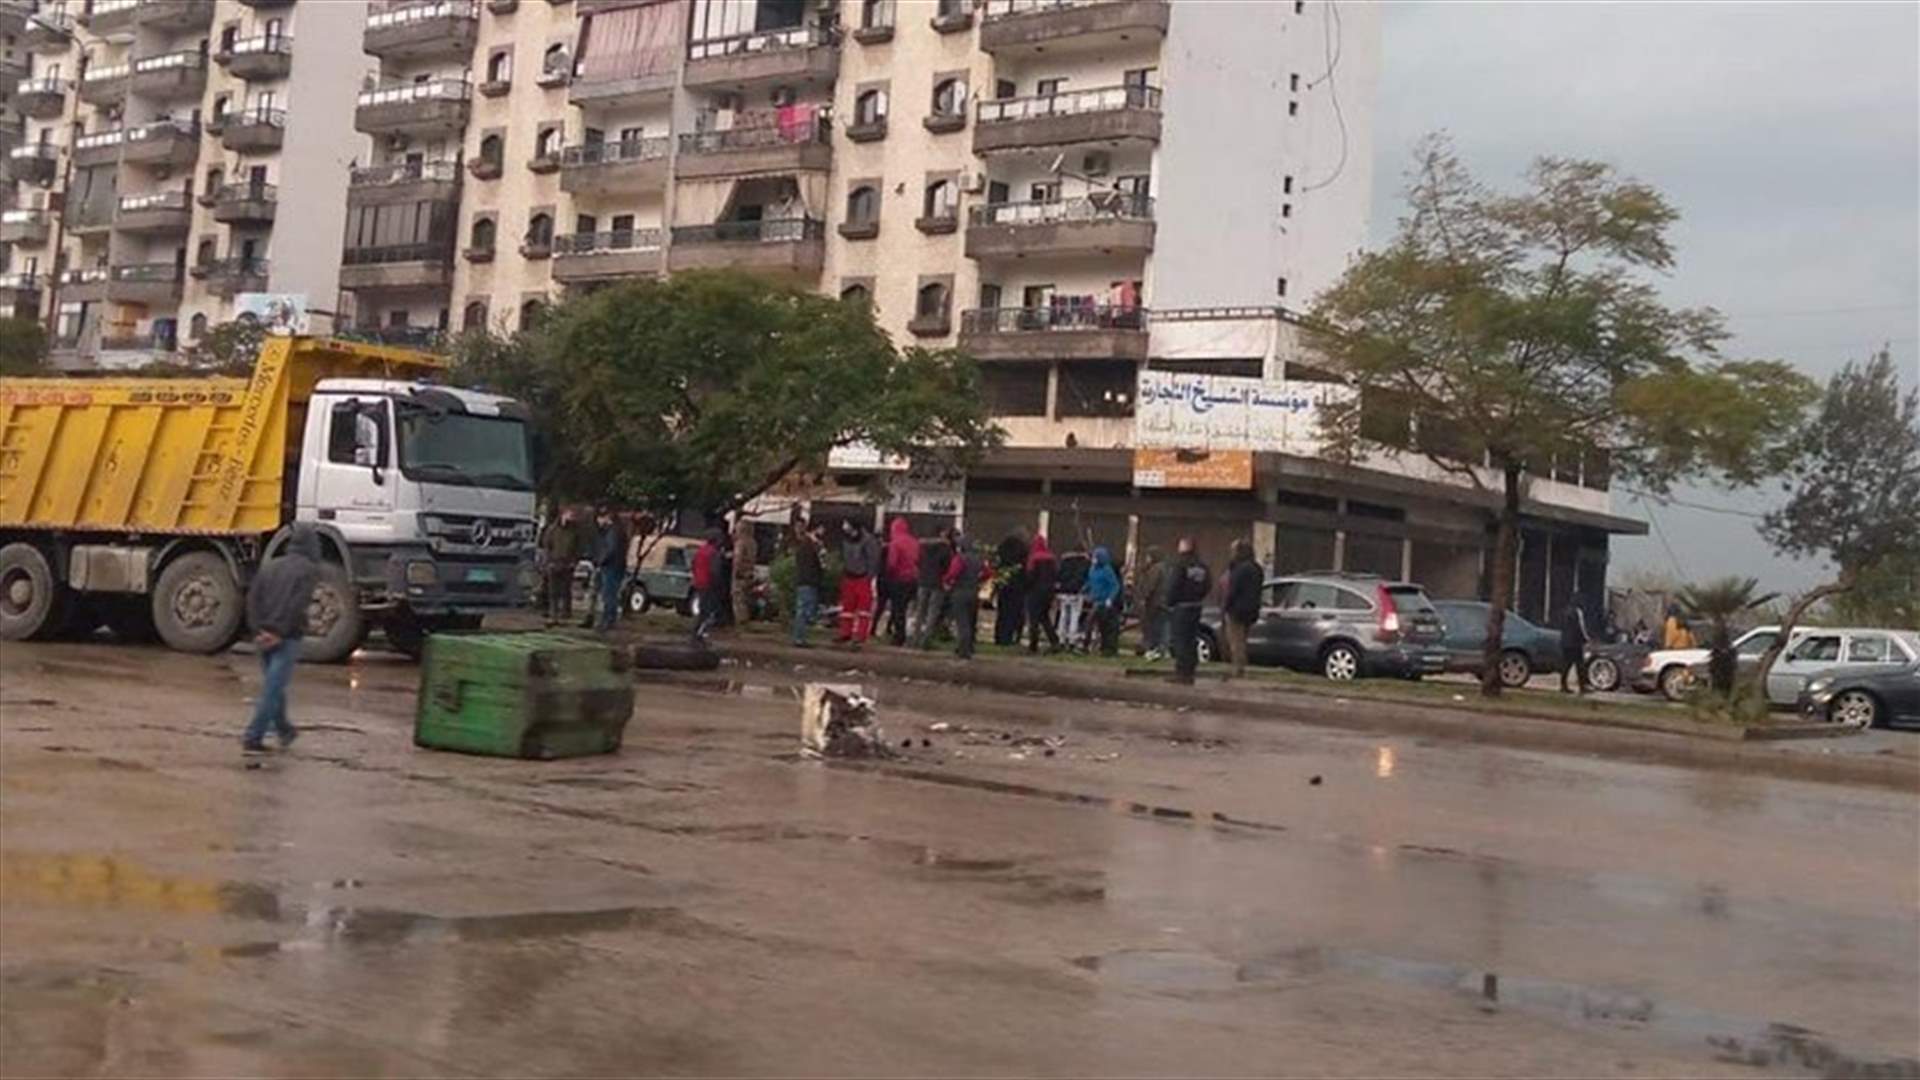 People cut off Bab al-Tabbaneh highway in Tripoli, in protest against power and water shortages